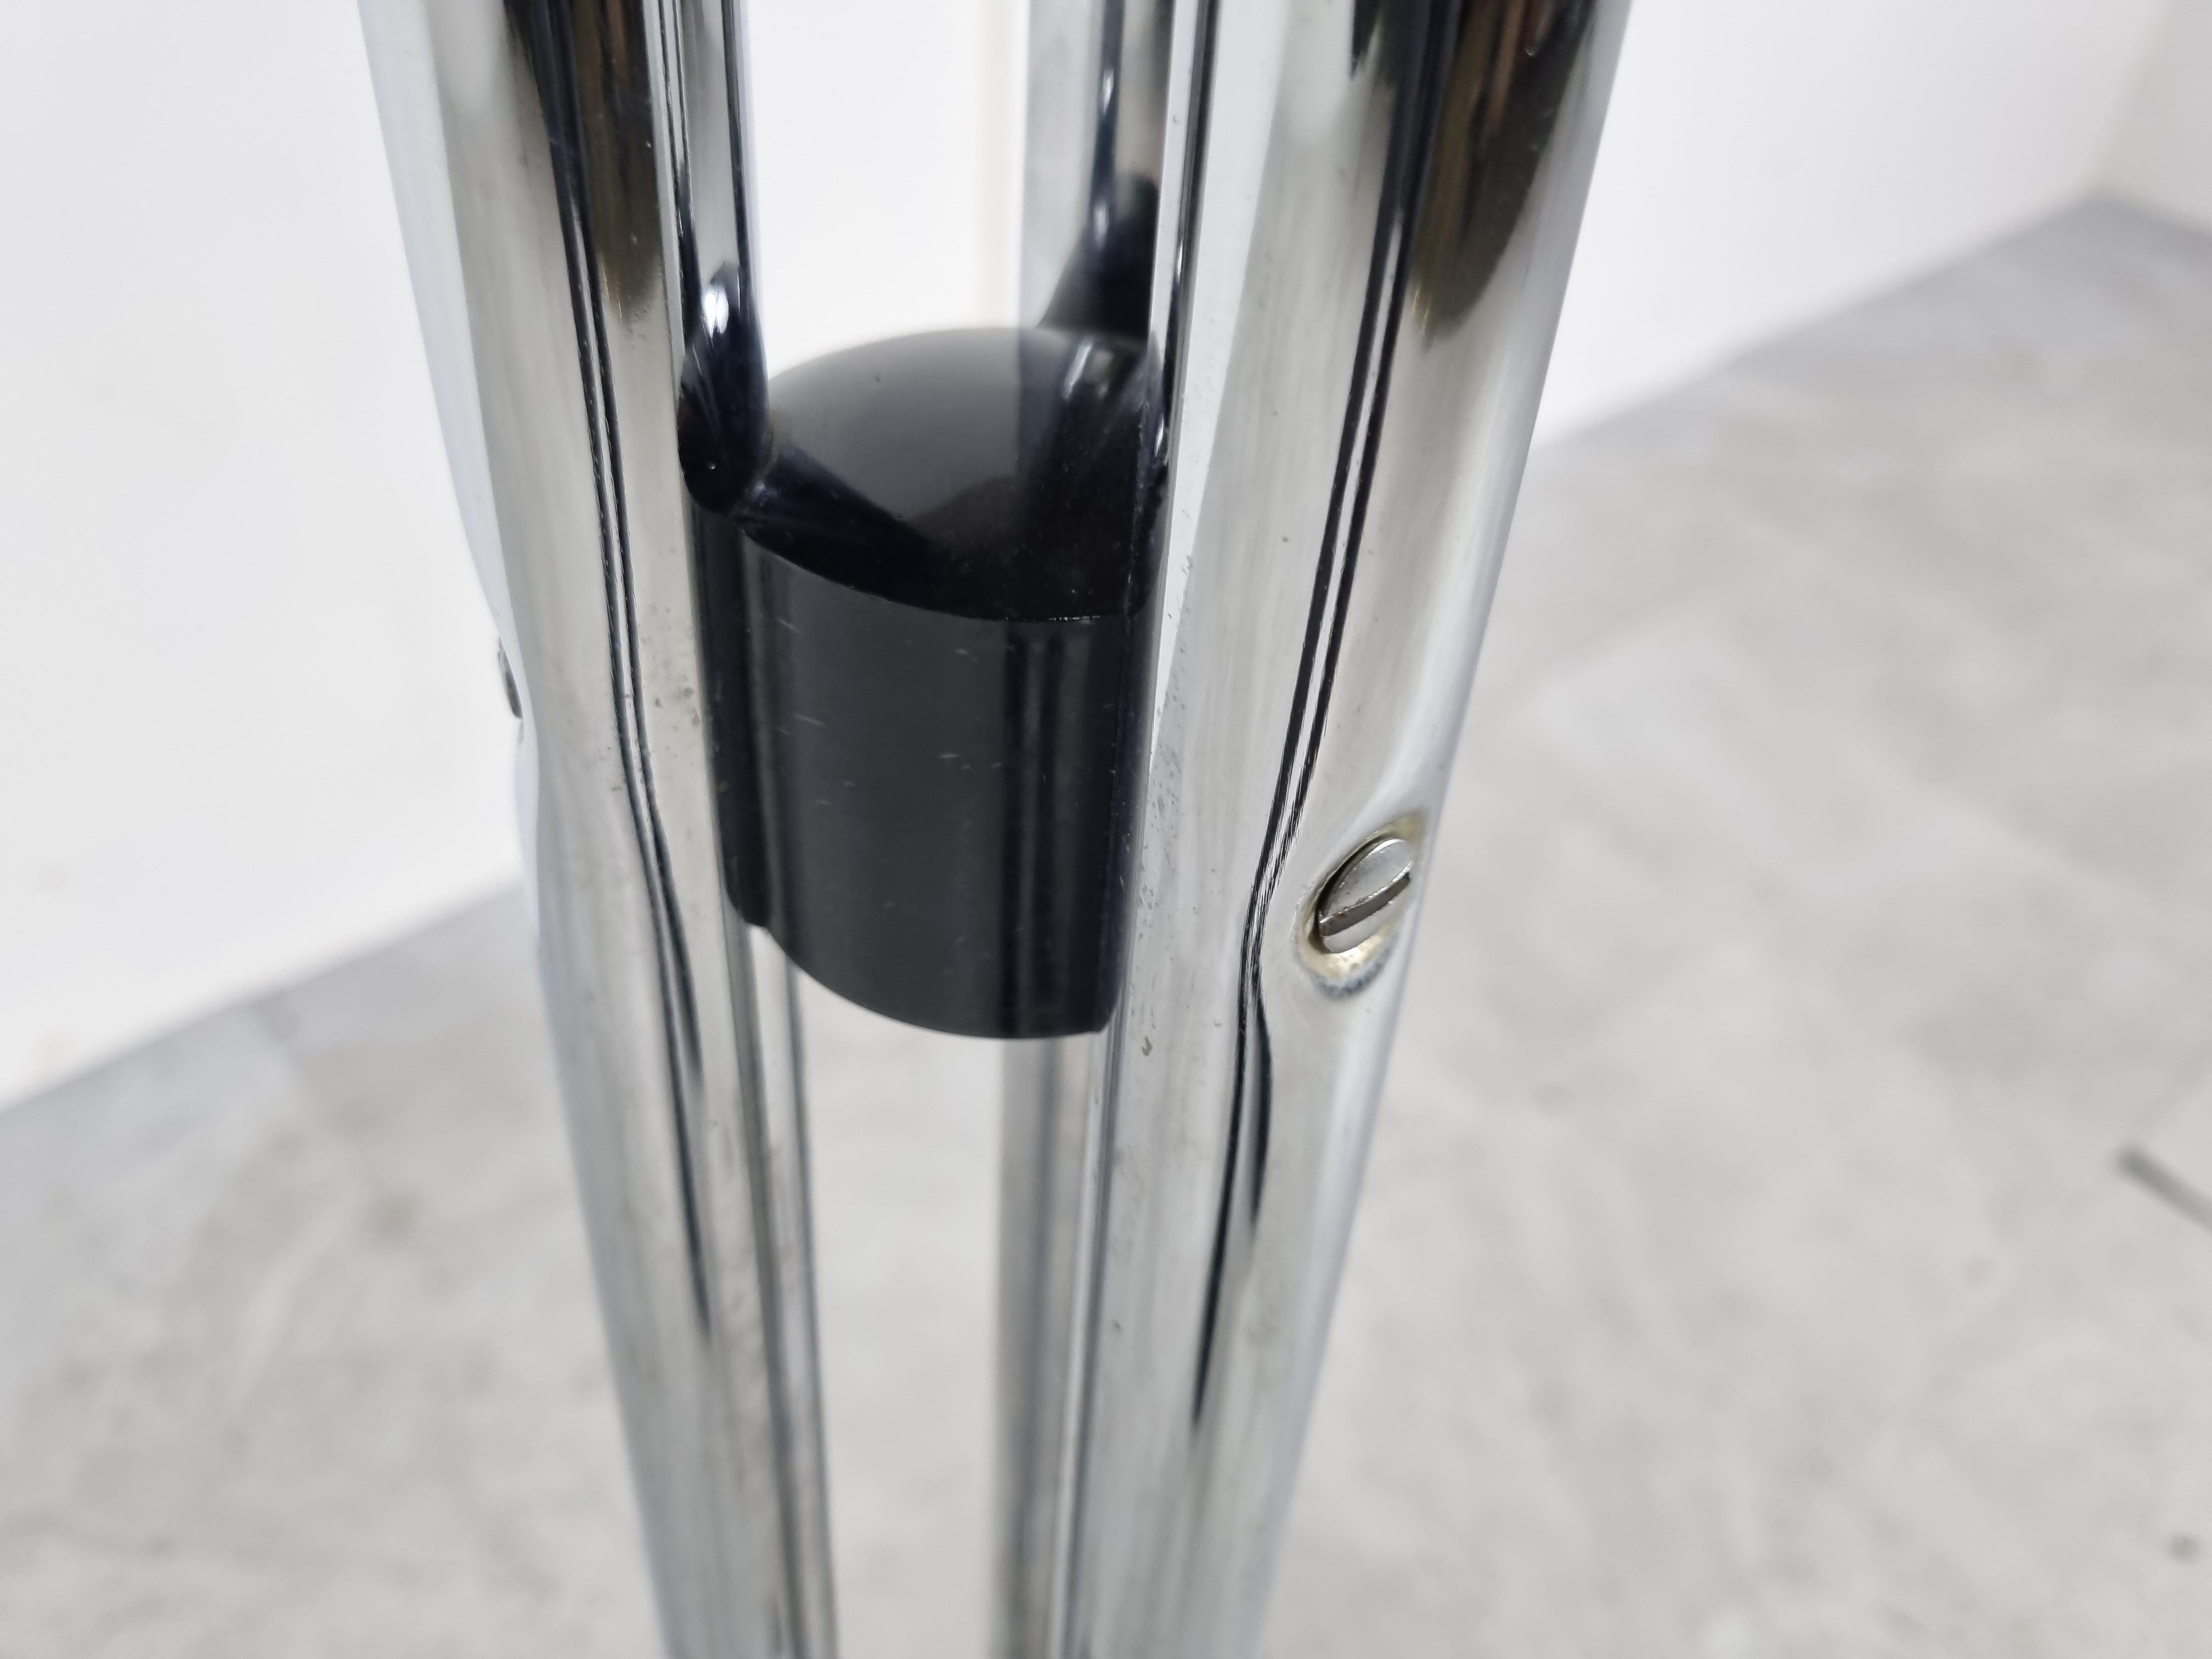 Vintage chromed steel coat stand designed by Willy Van Der Meeren for Tubax. - Model 022

These where widely used in offices and for the Belgian army. 

1970s - Belgium

Good condition with age related wear.

Dimensions:
Height: